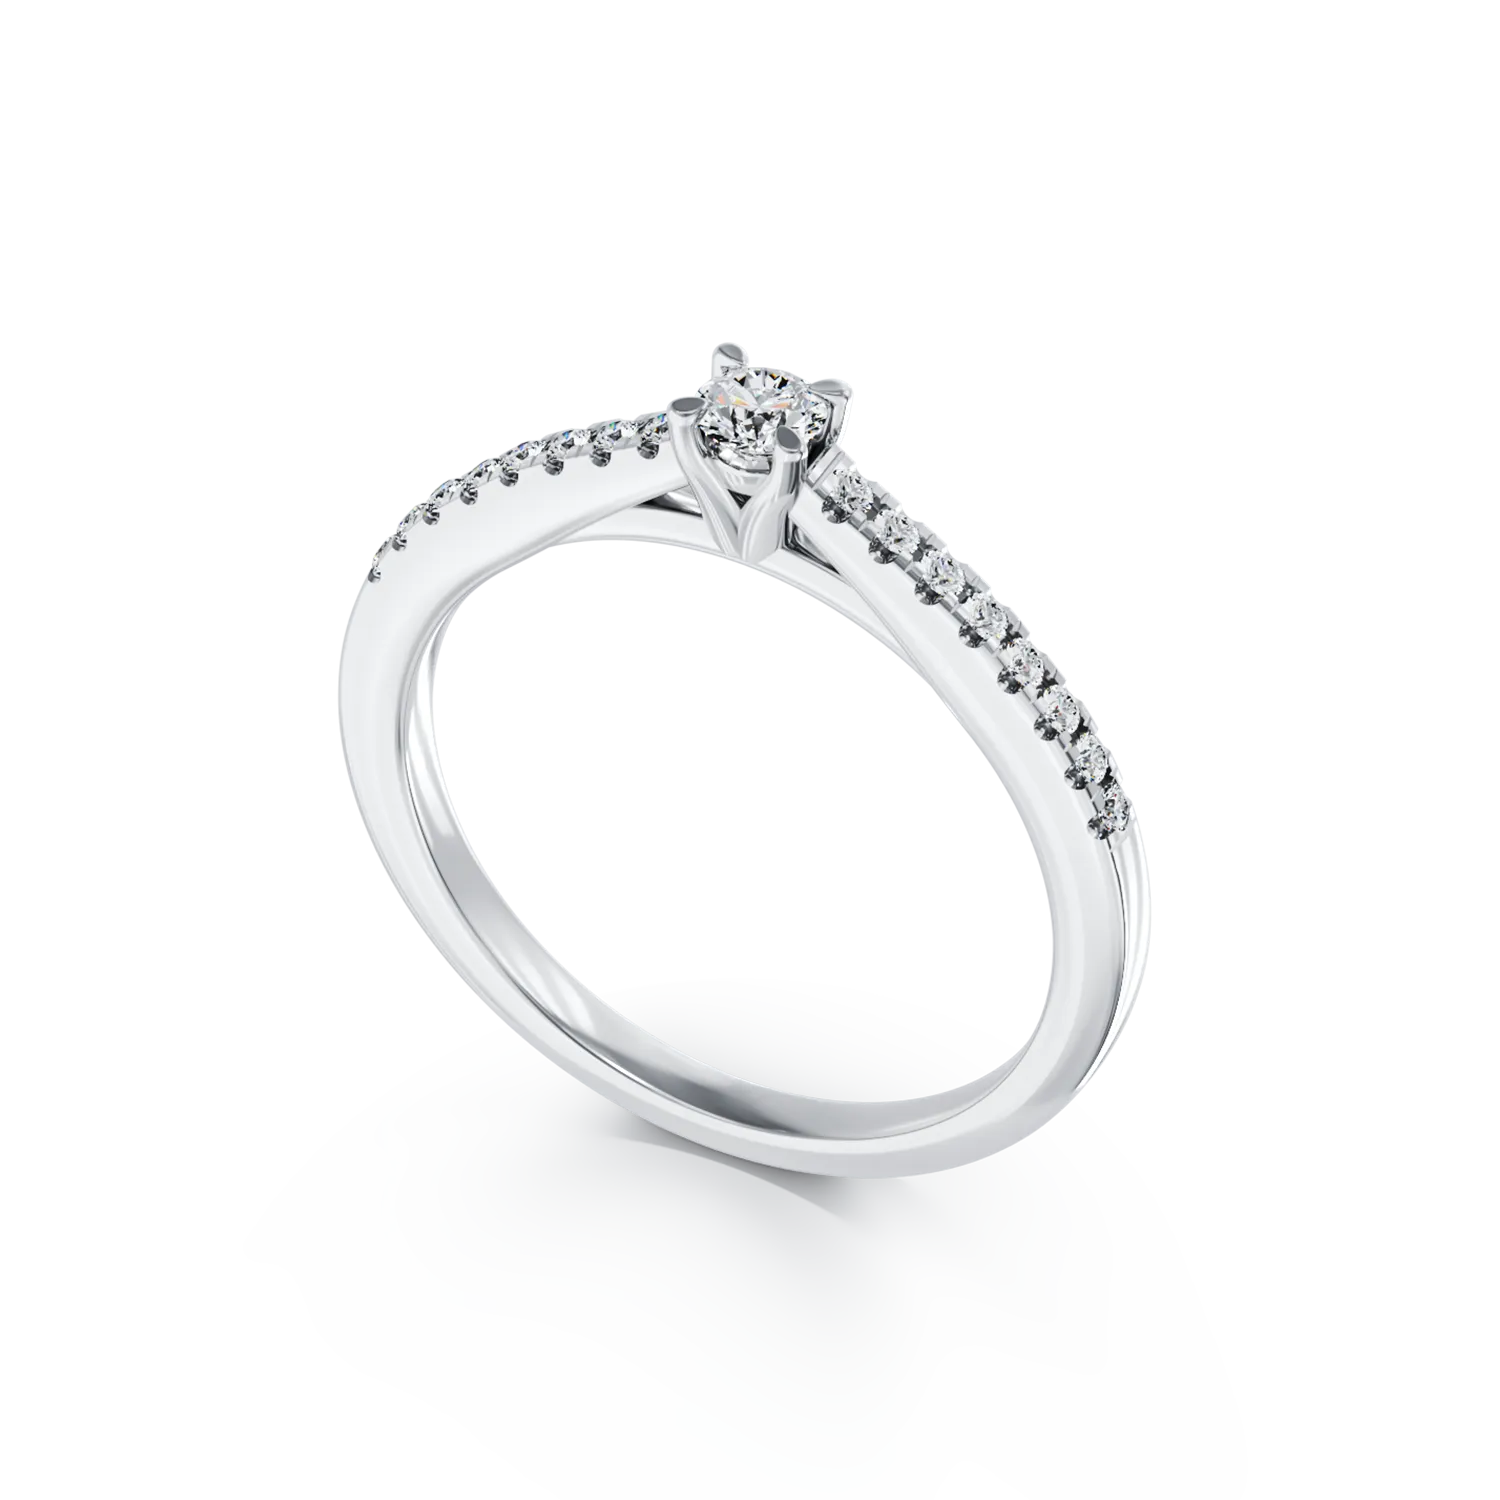 18K white gold engagement ring with 0.14ct diamond and 0.16ct diamond